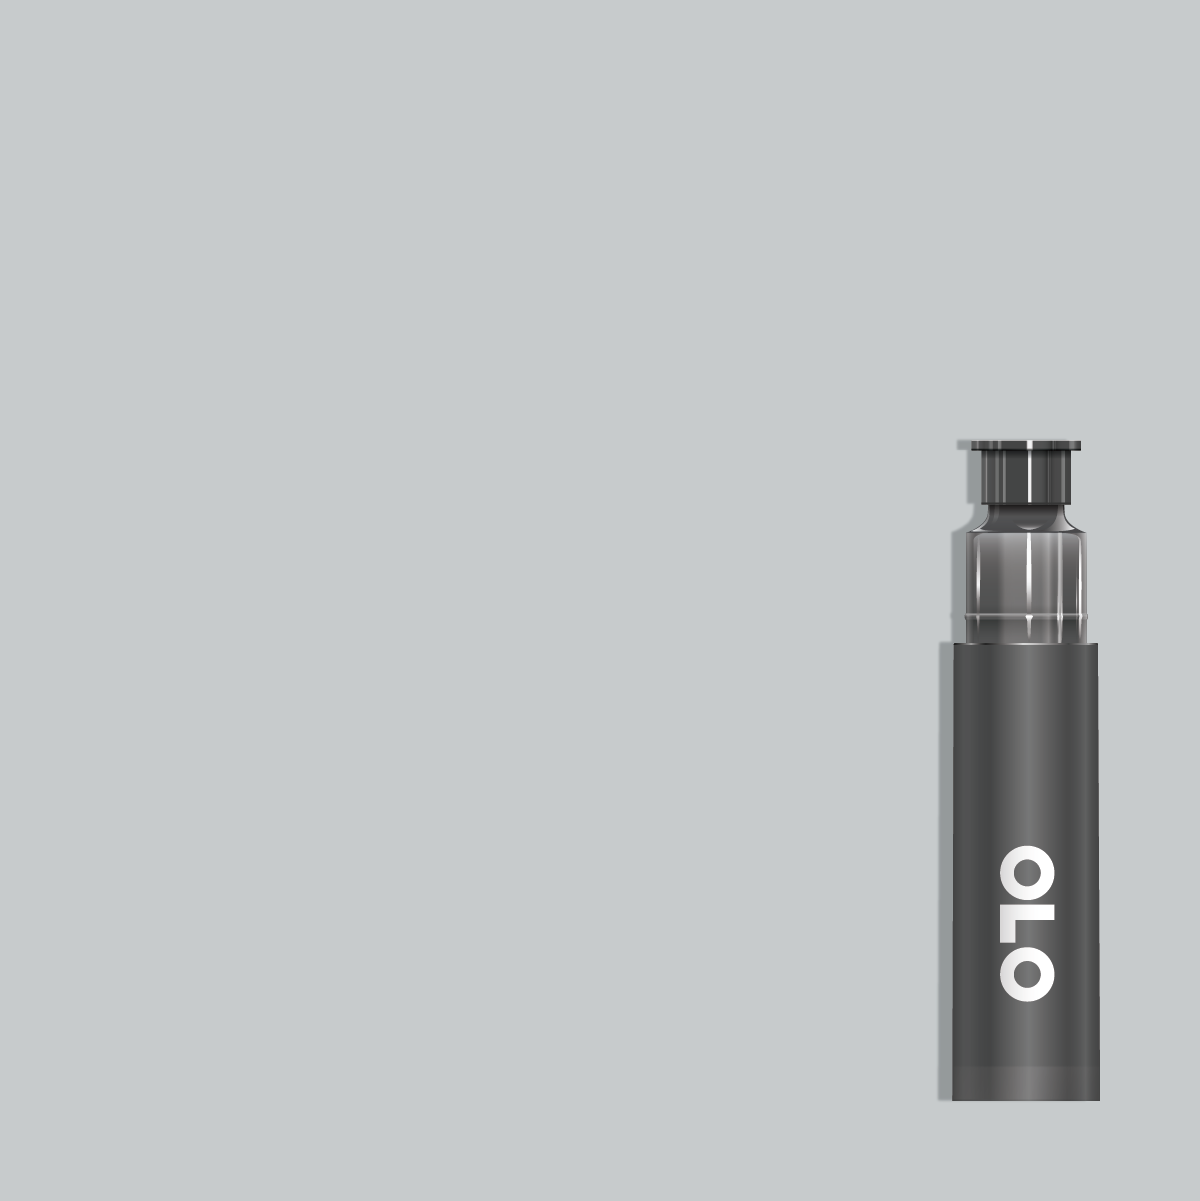 OLO CG1 Cool Gray 1 Replacement Cartridge